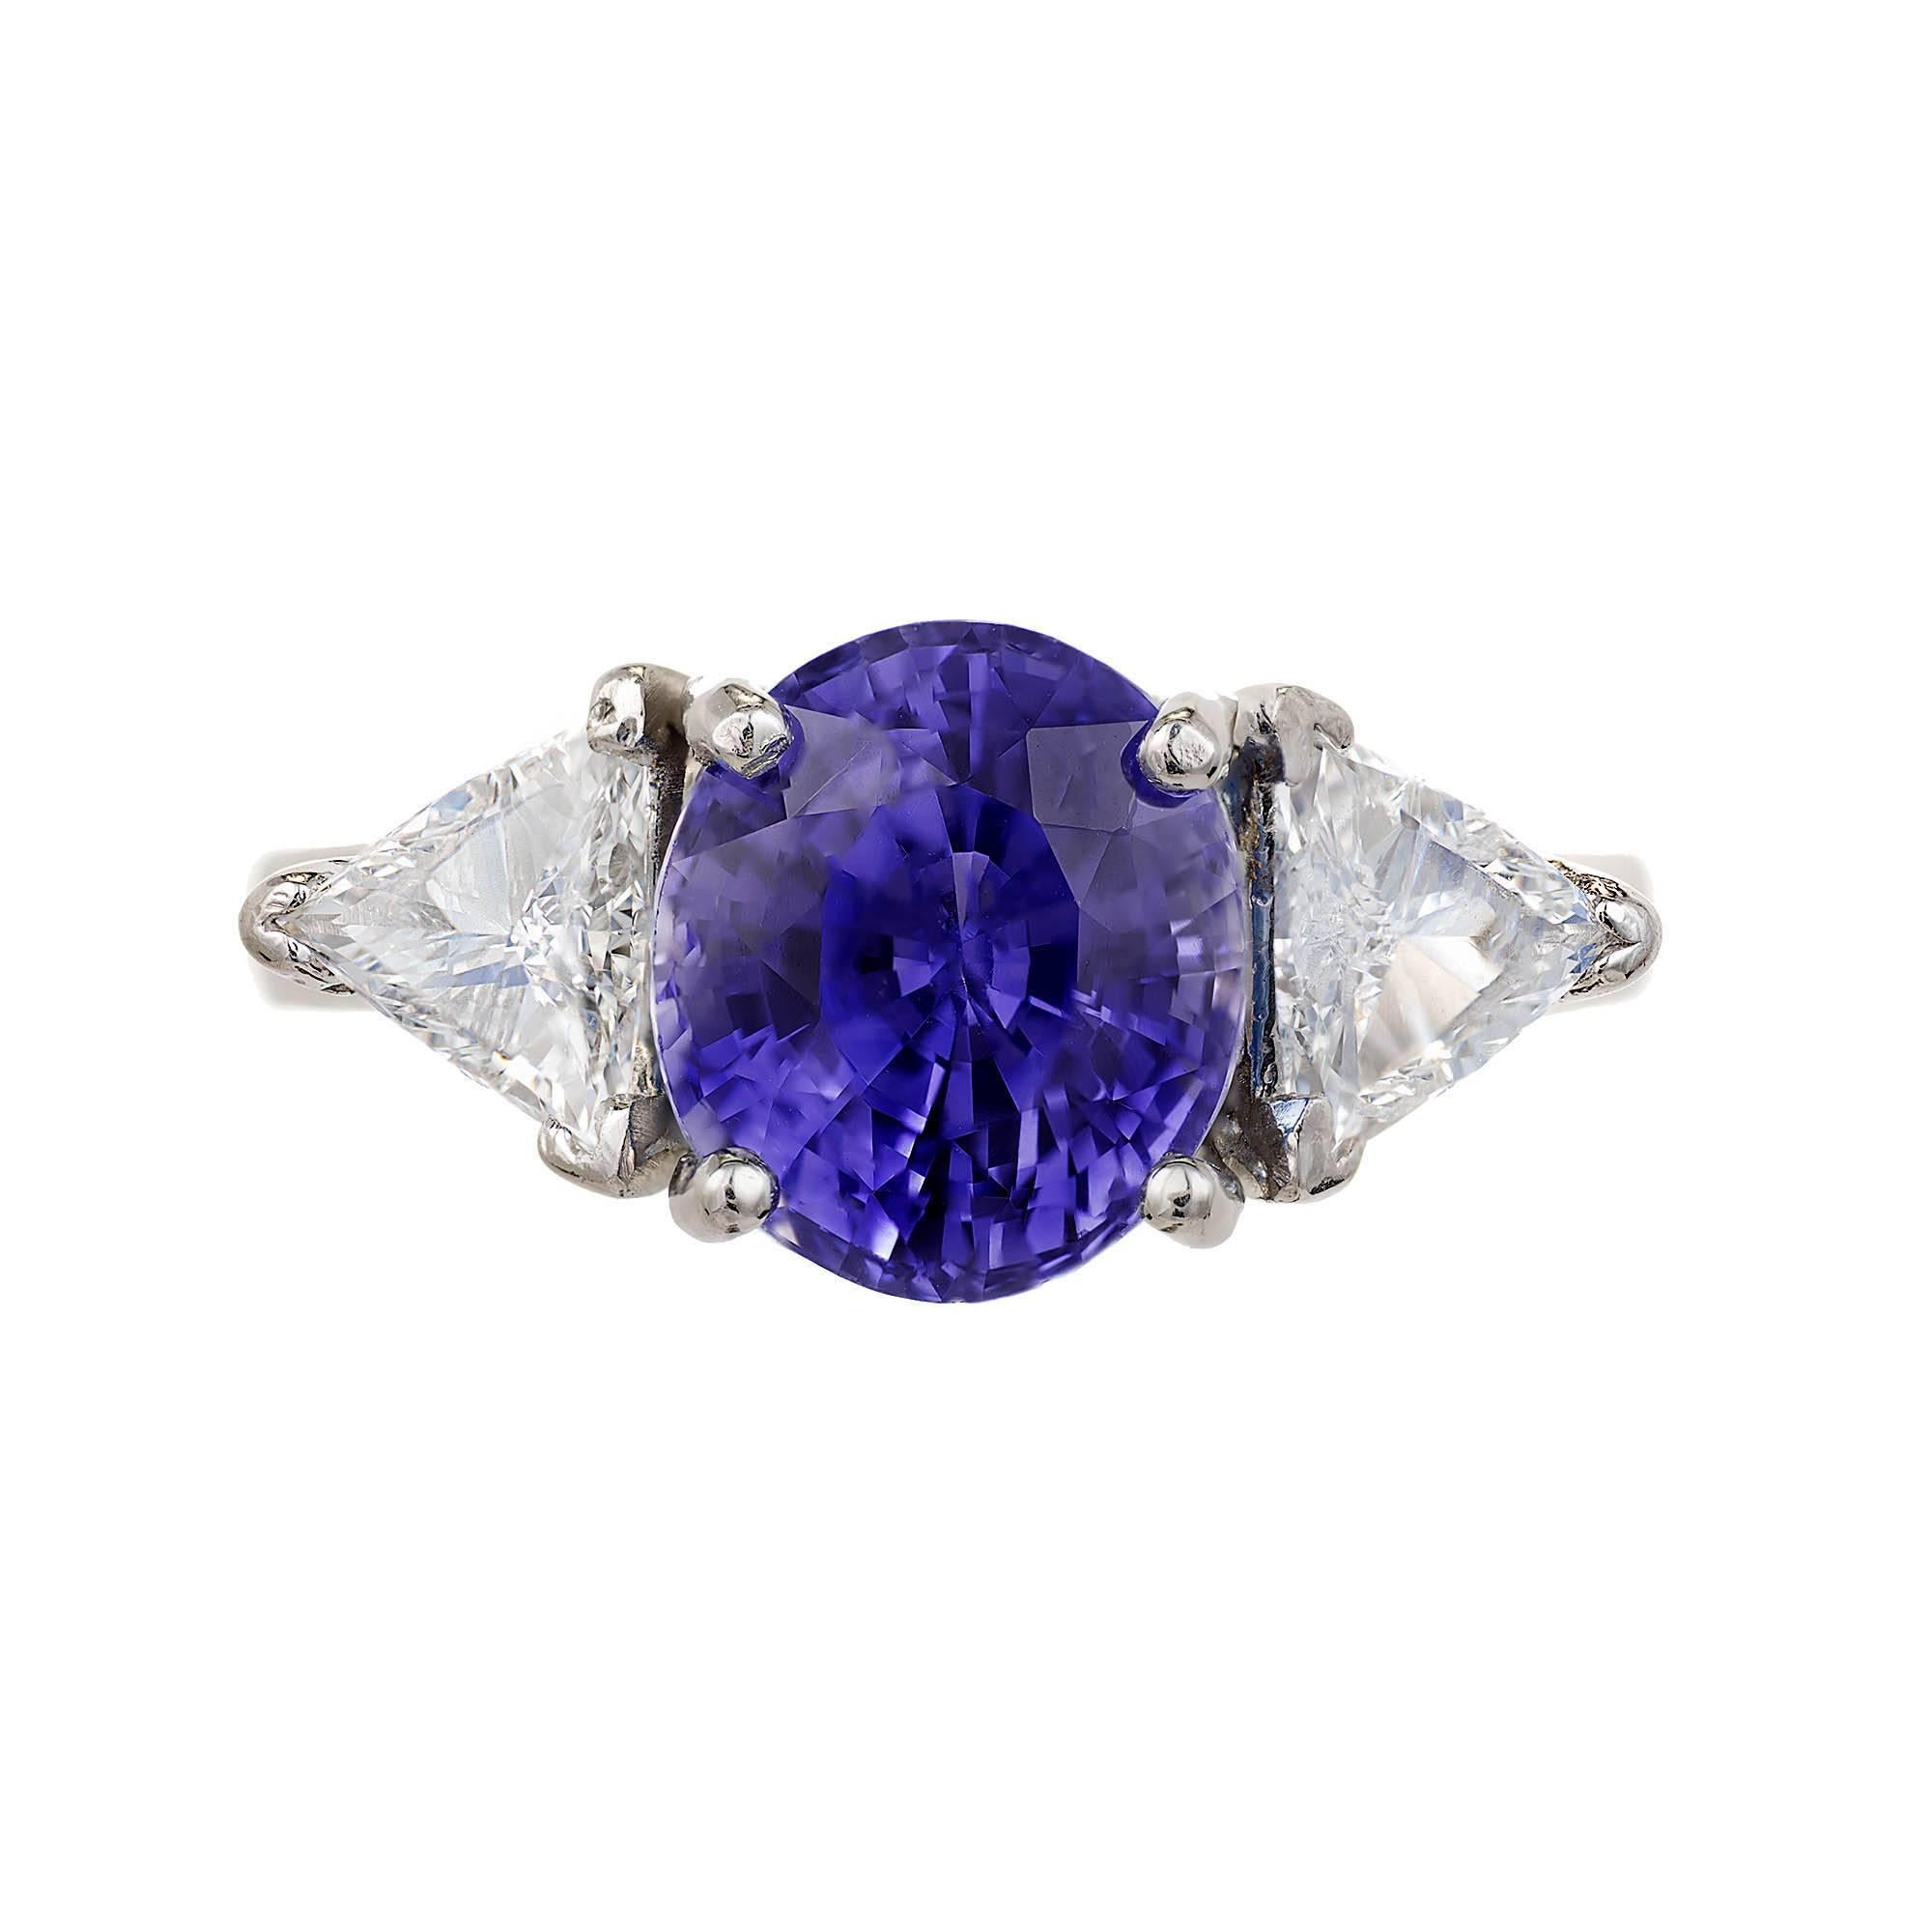 Bright purple blue natural no heat 5.17ct oval Sapphire diamond Platinum three-stone engagement ring. Matched with very sparkly trilliant cut side diamonds in a platinum setting.

1 purplish blue oval shape Sapphire, approx. total weight 5.17ct, AGL